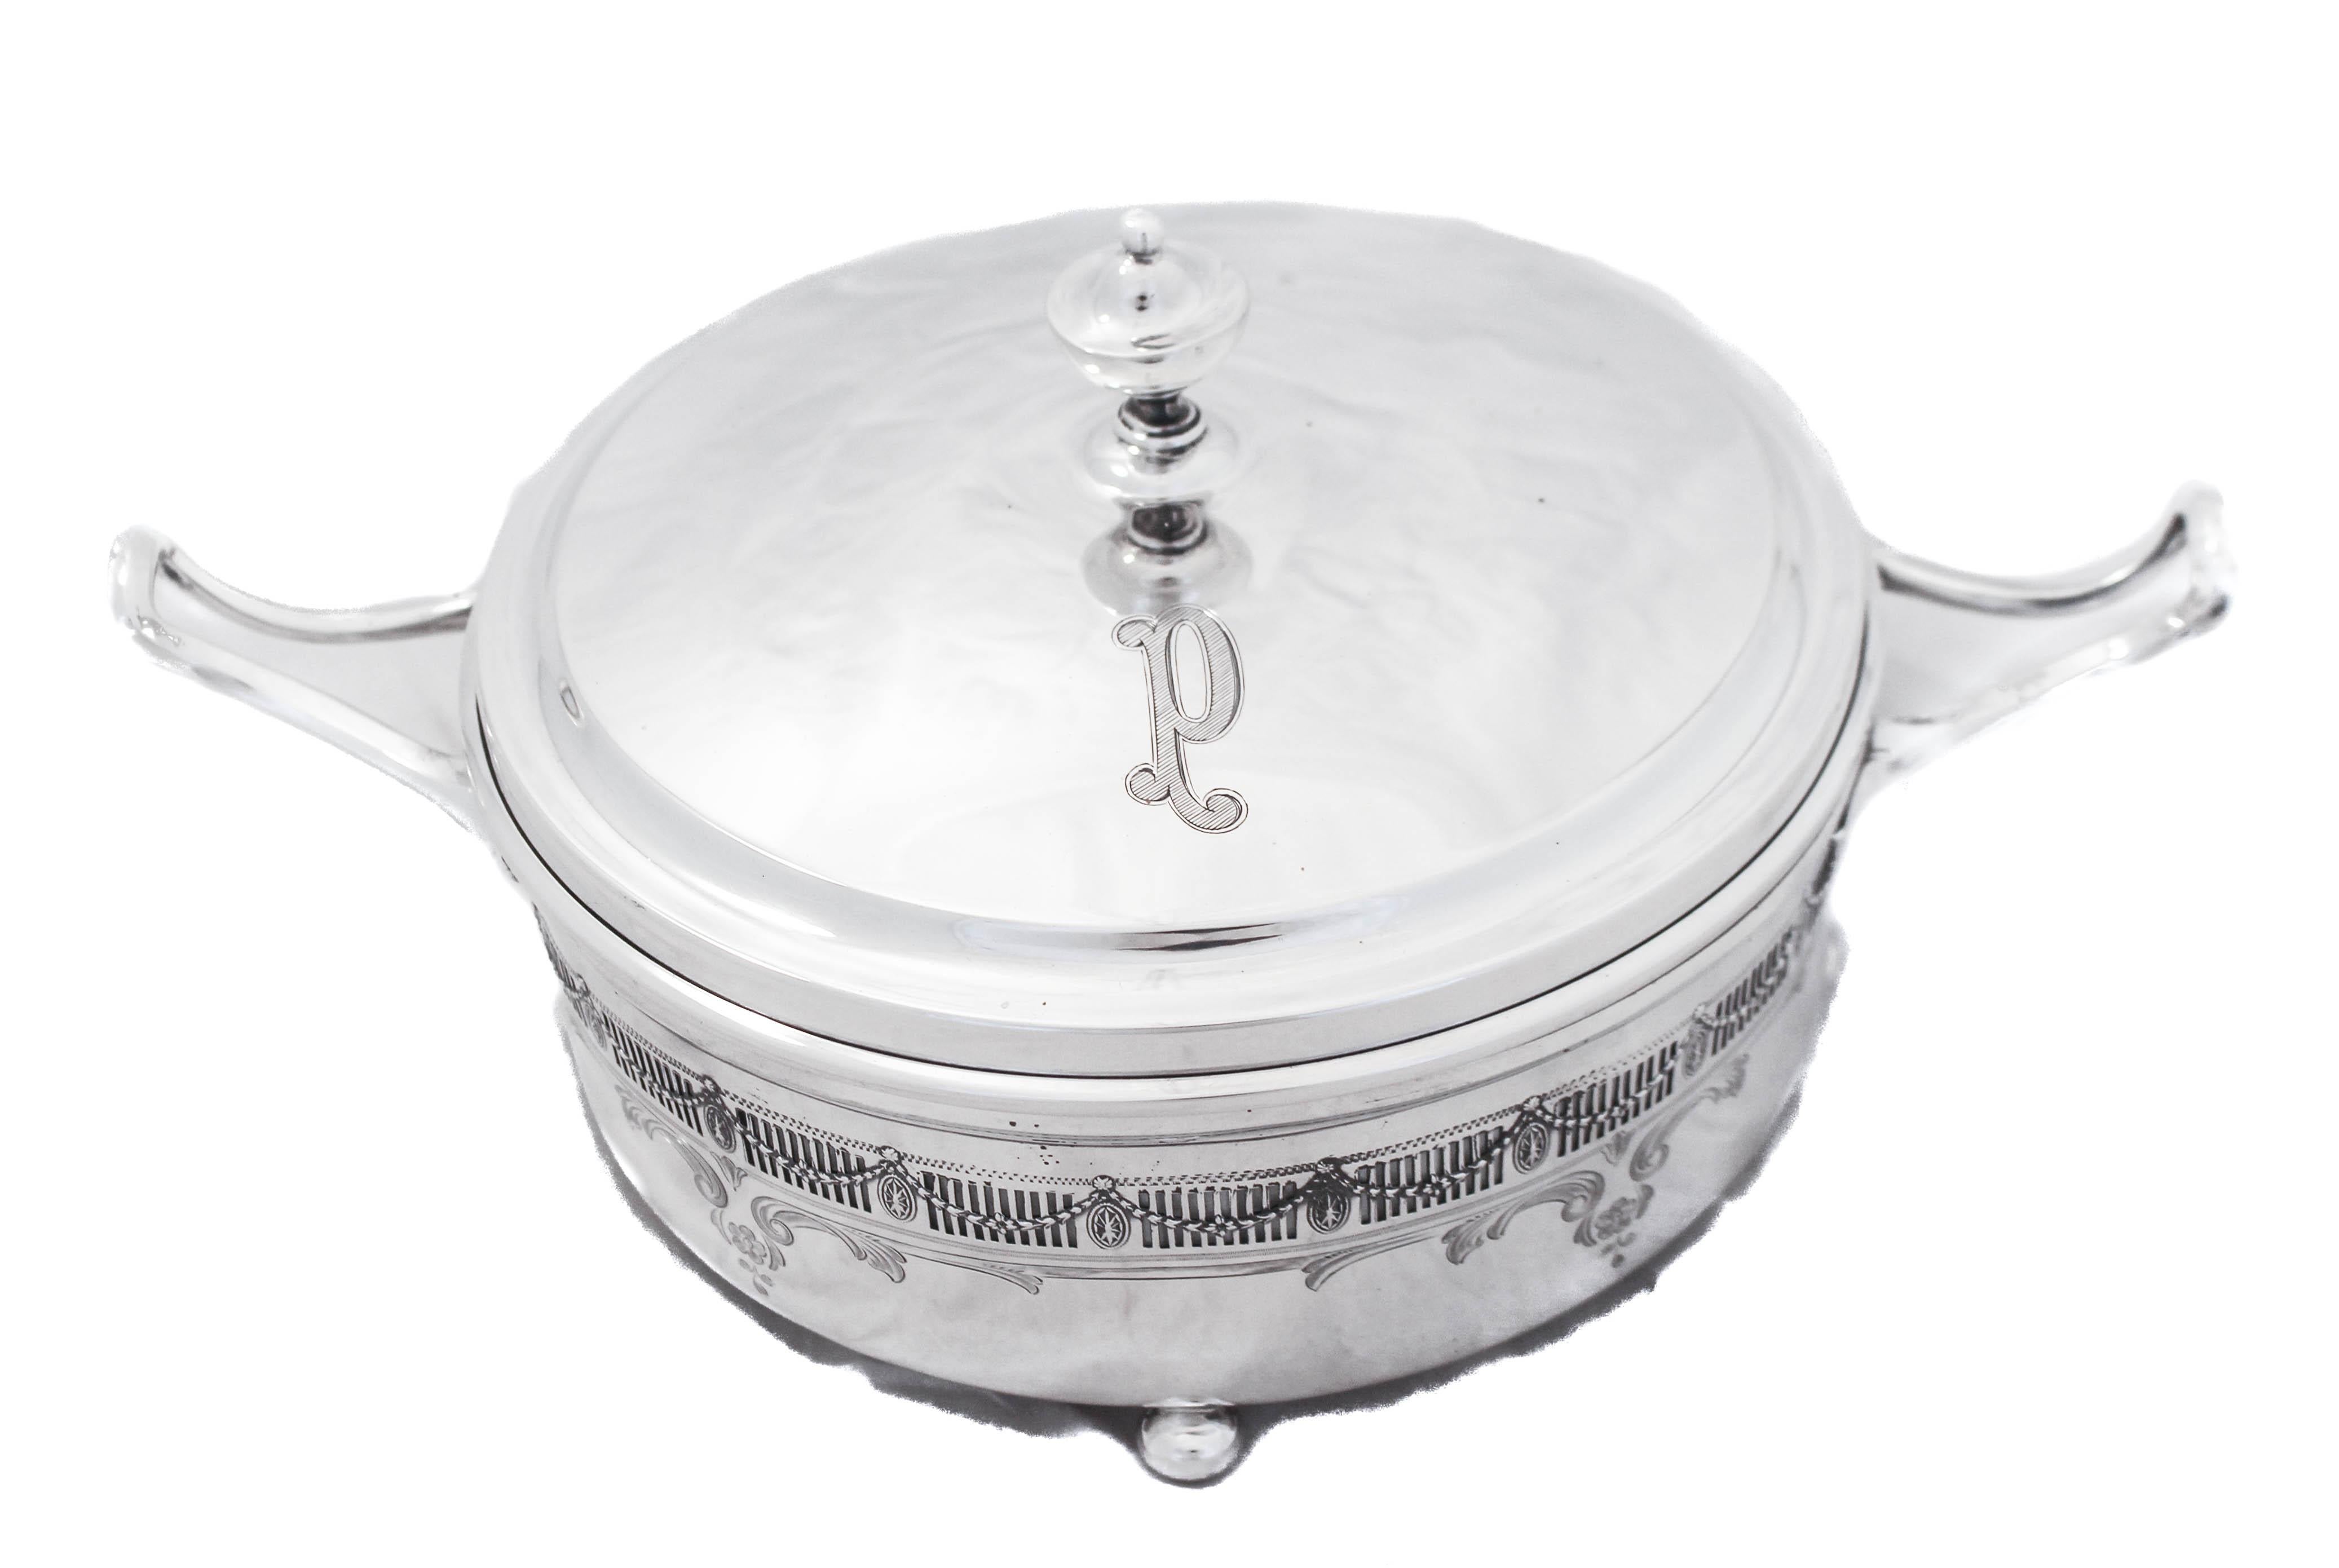 We are proud to offer you this sterling silver casserole holder by Frank Whiting Silver — with the original casserole dish. There are three pieces to this item: the sterling holder, sterling lid and the original casserole dish. All are in mint